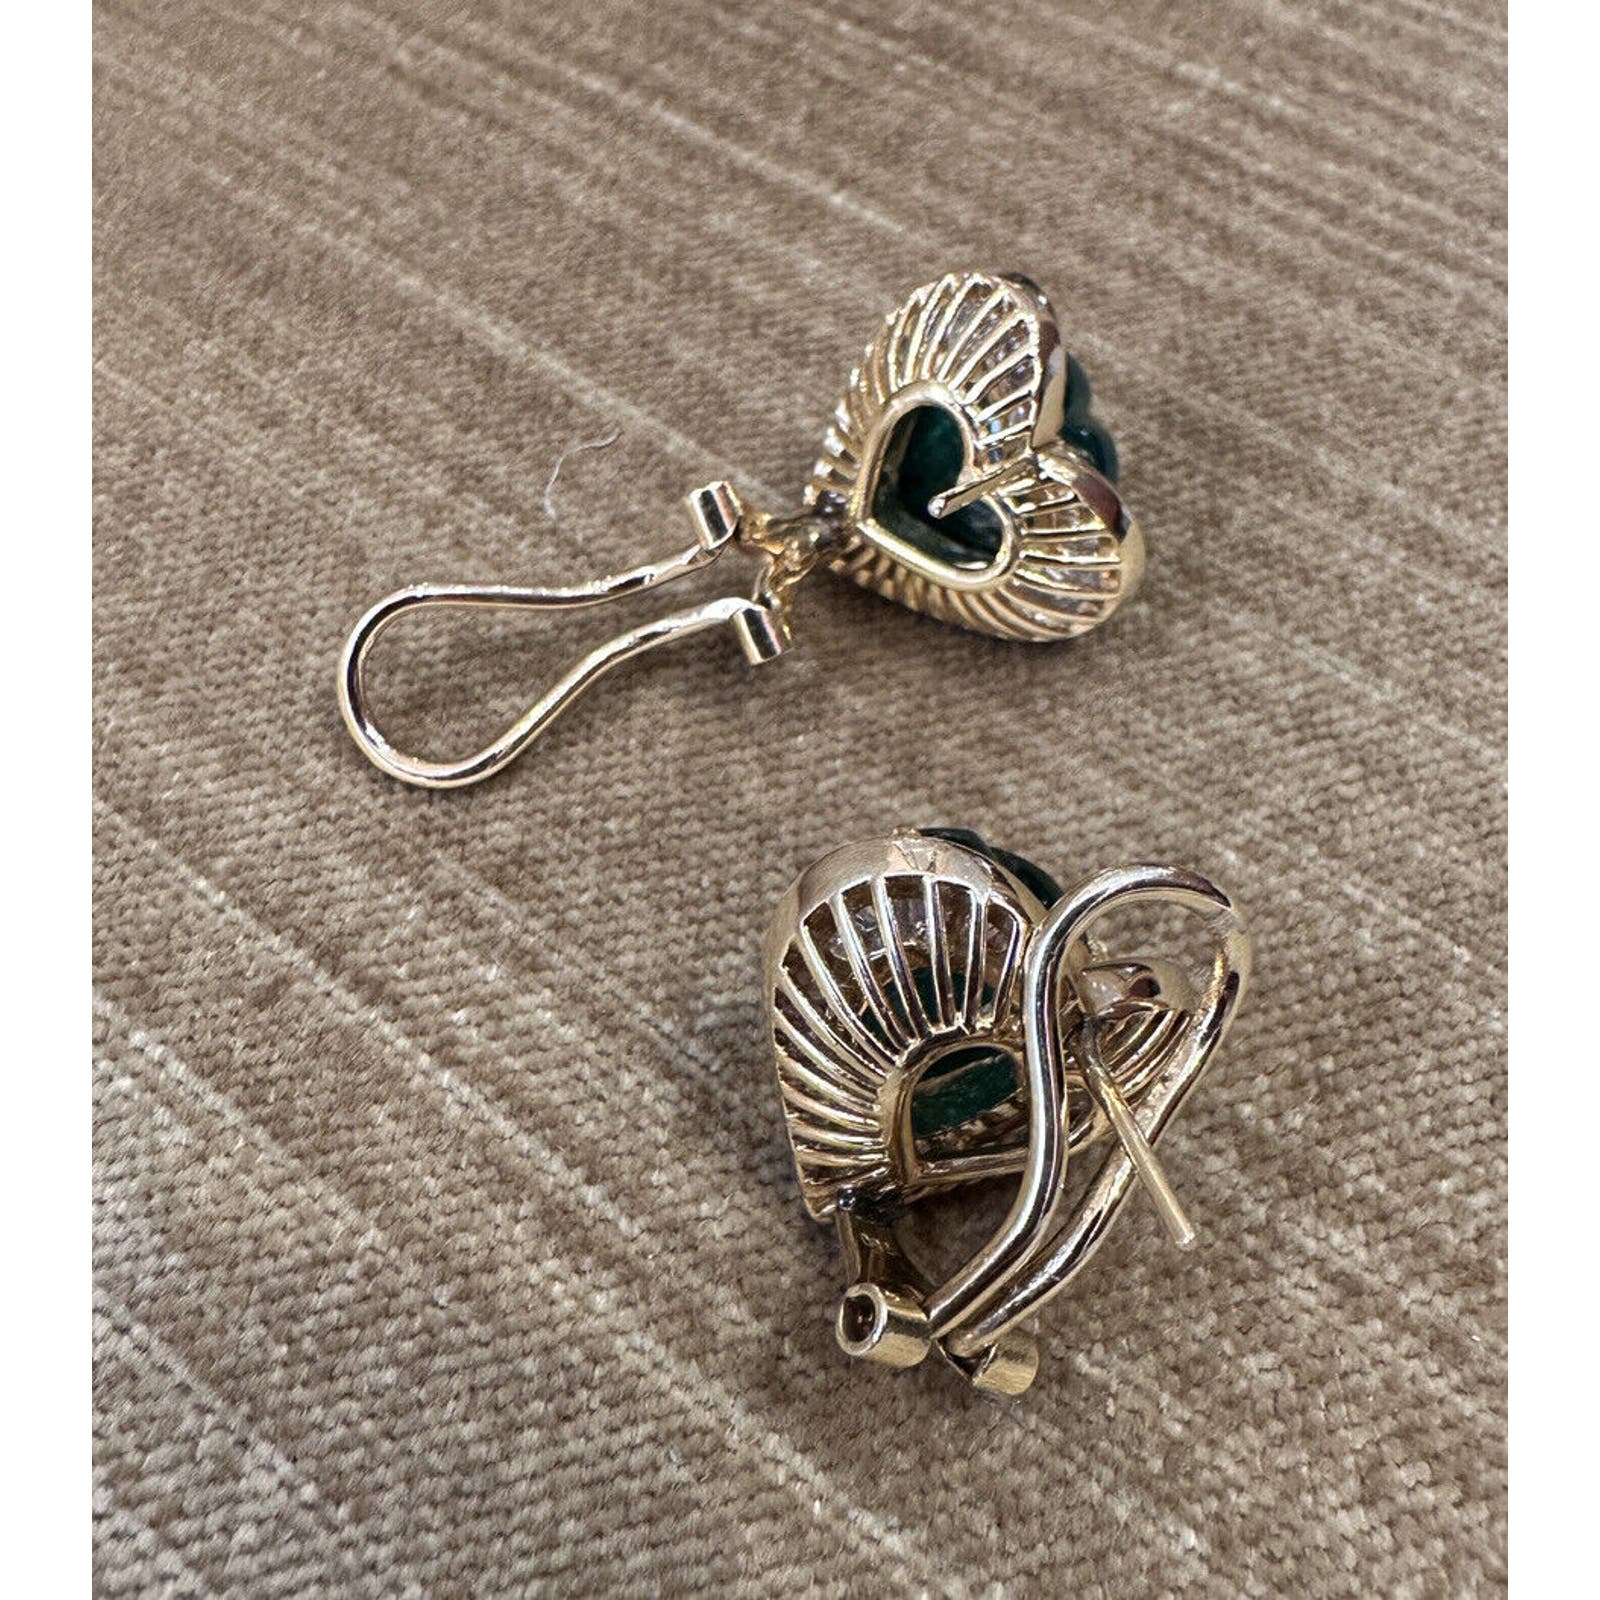 Heart Cabochon Emerald and Baguette Diamond Earrings in 18k Yellow Gold-HM2347E